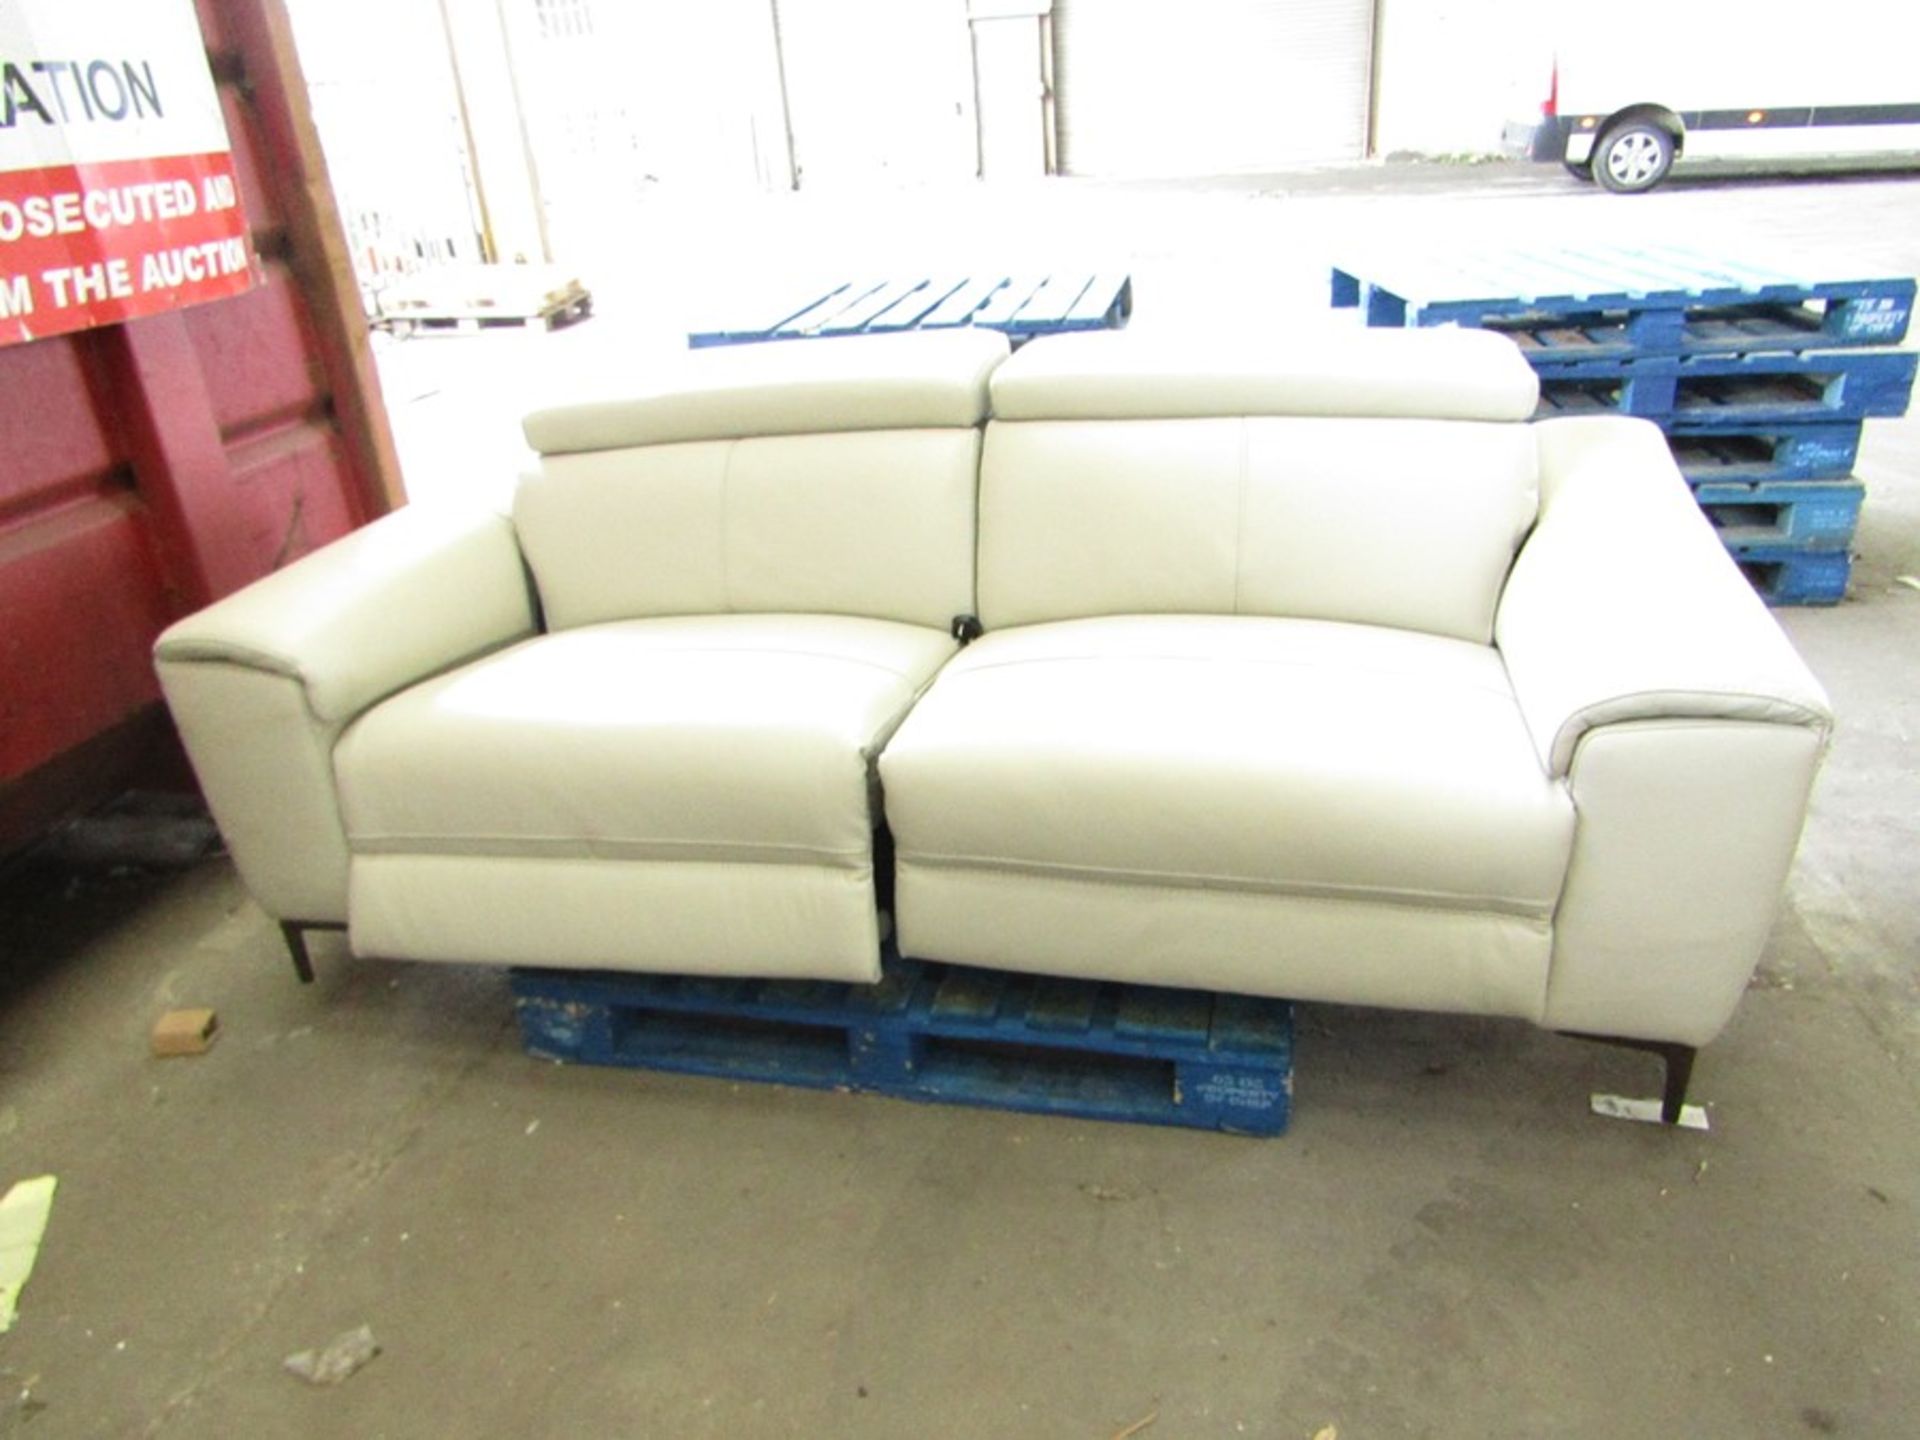 Costco Italian Leather 2 seater electric reclining Sofa, in Stone Coloured leather tested wroking